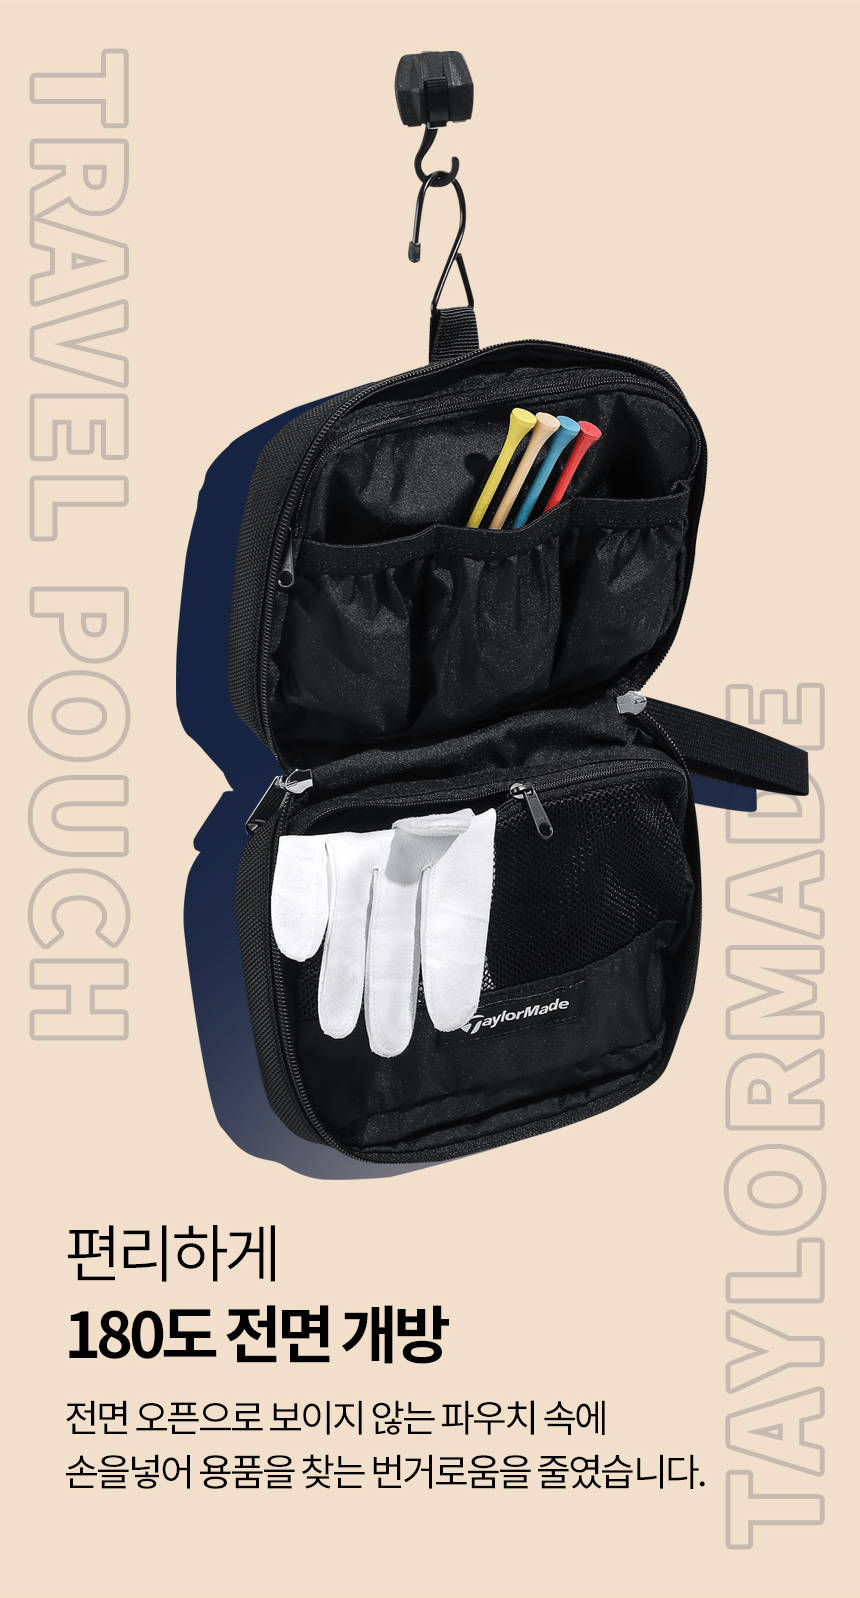 taylormade_travel_pouch_TB681_22_03.jpg